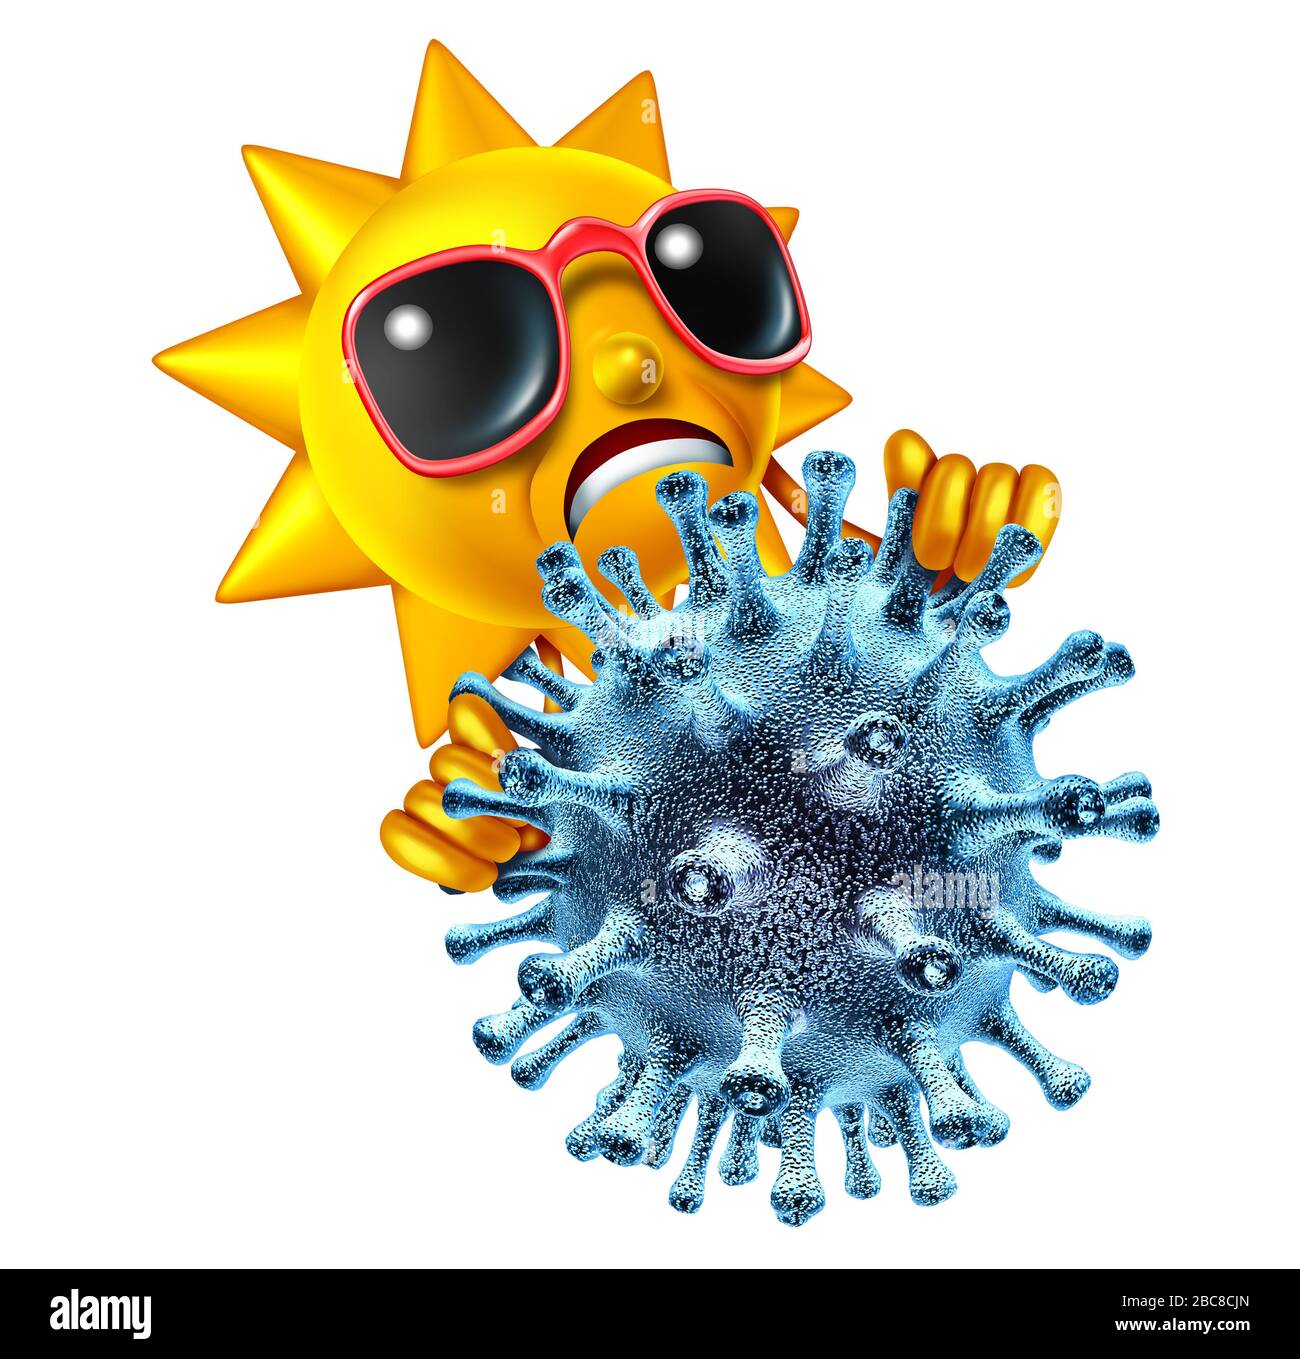 Summer virus and effects of coronavirus pandemic outbreakduring summertime activites as a sad hot sun character holding a pathogen disease cell. Stock Photo